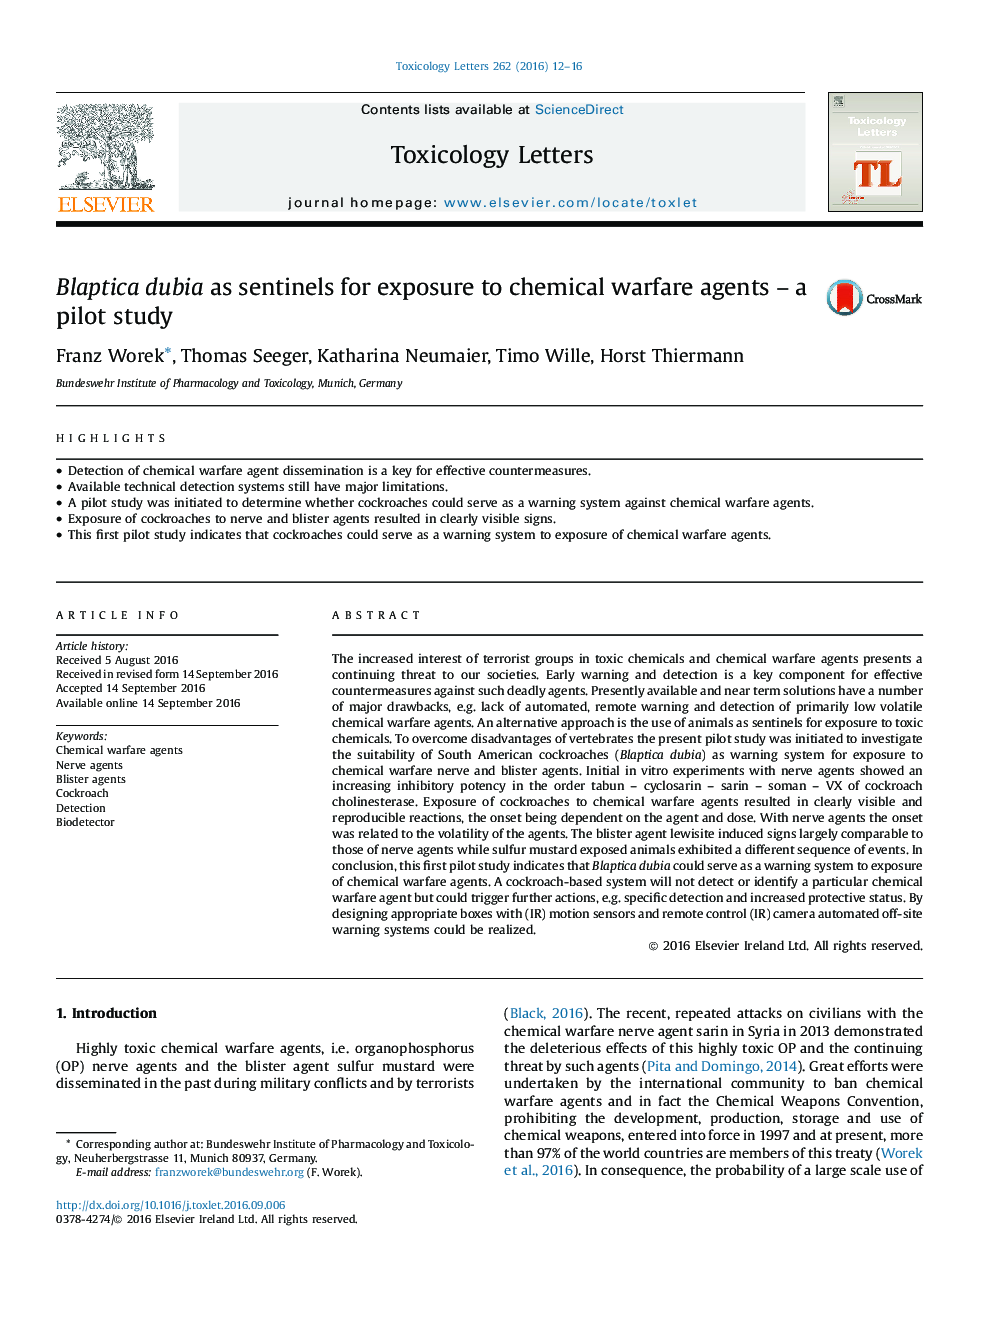 Blaptica dubia as sentinels for exposure to chemical warfare agents - a pilot study